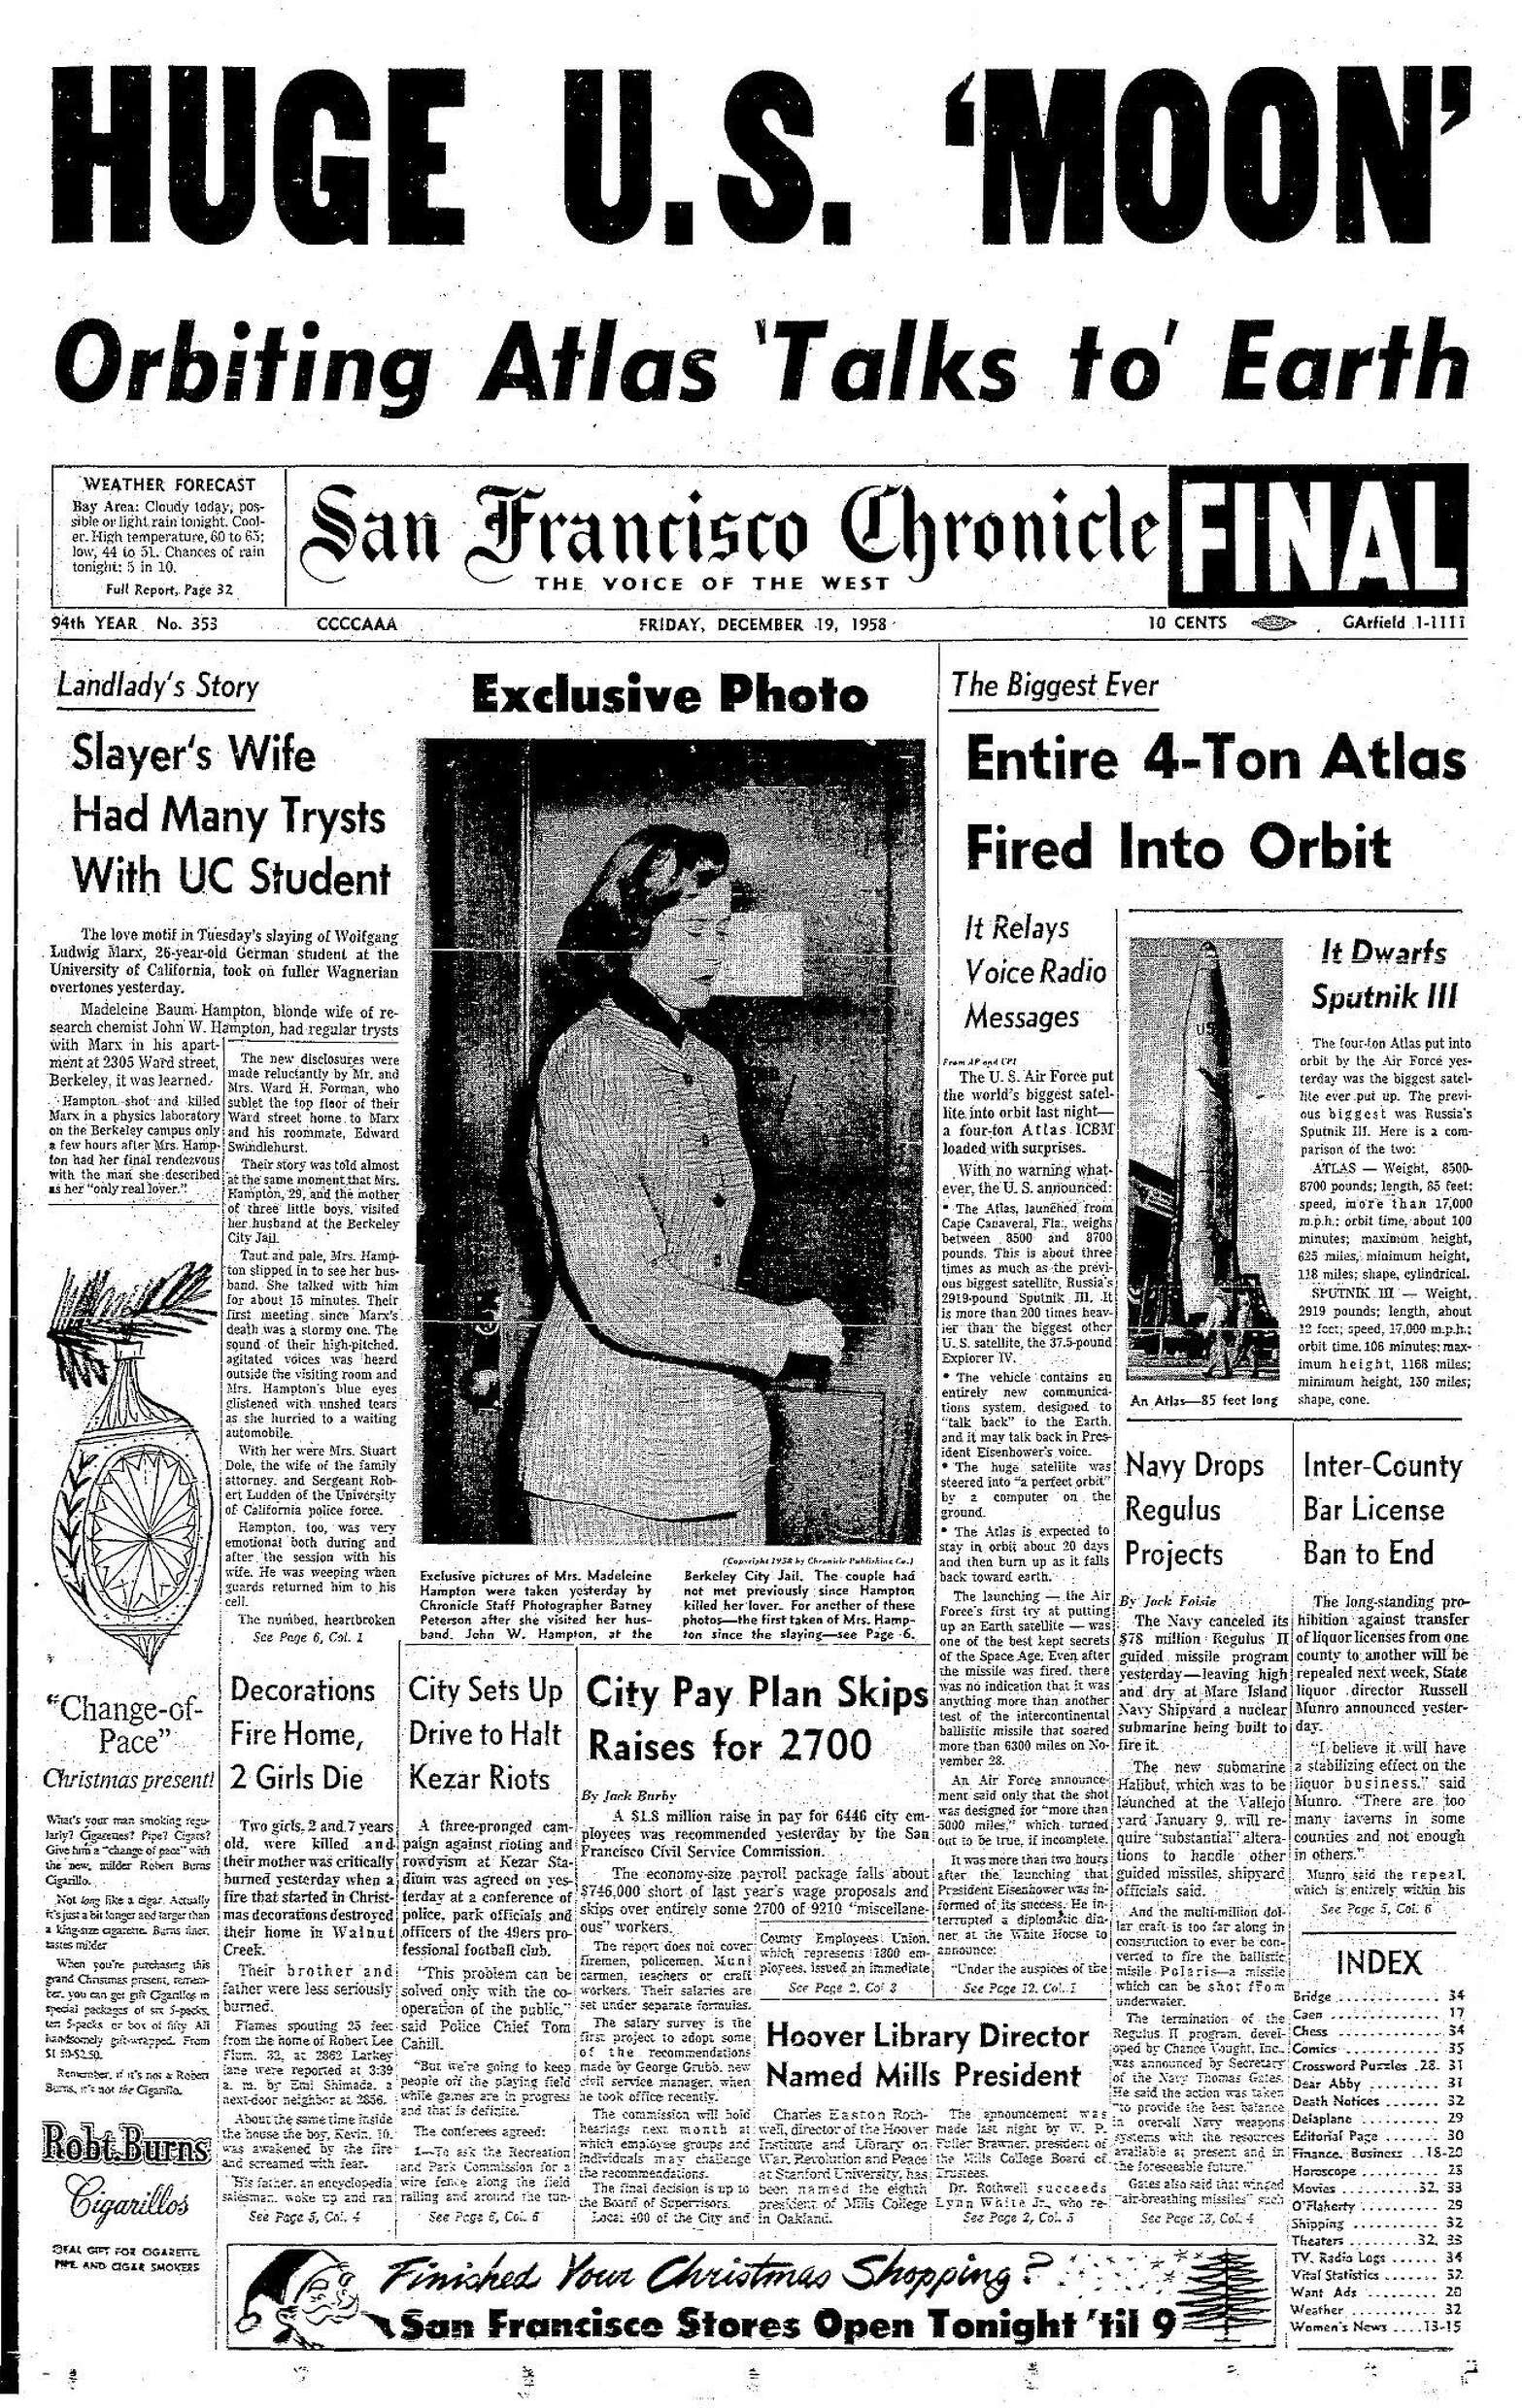 Chronicle Covers: Boom! The USA is back in the Space Race - SFChronicle.com1566 x 2480